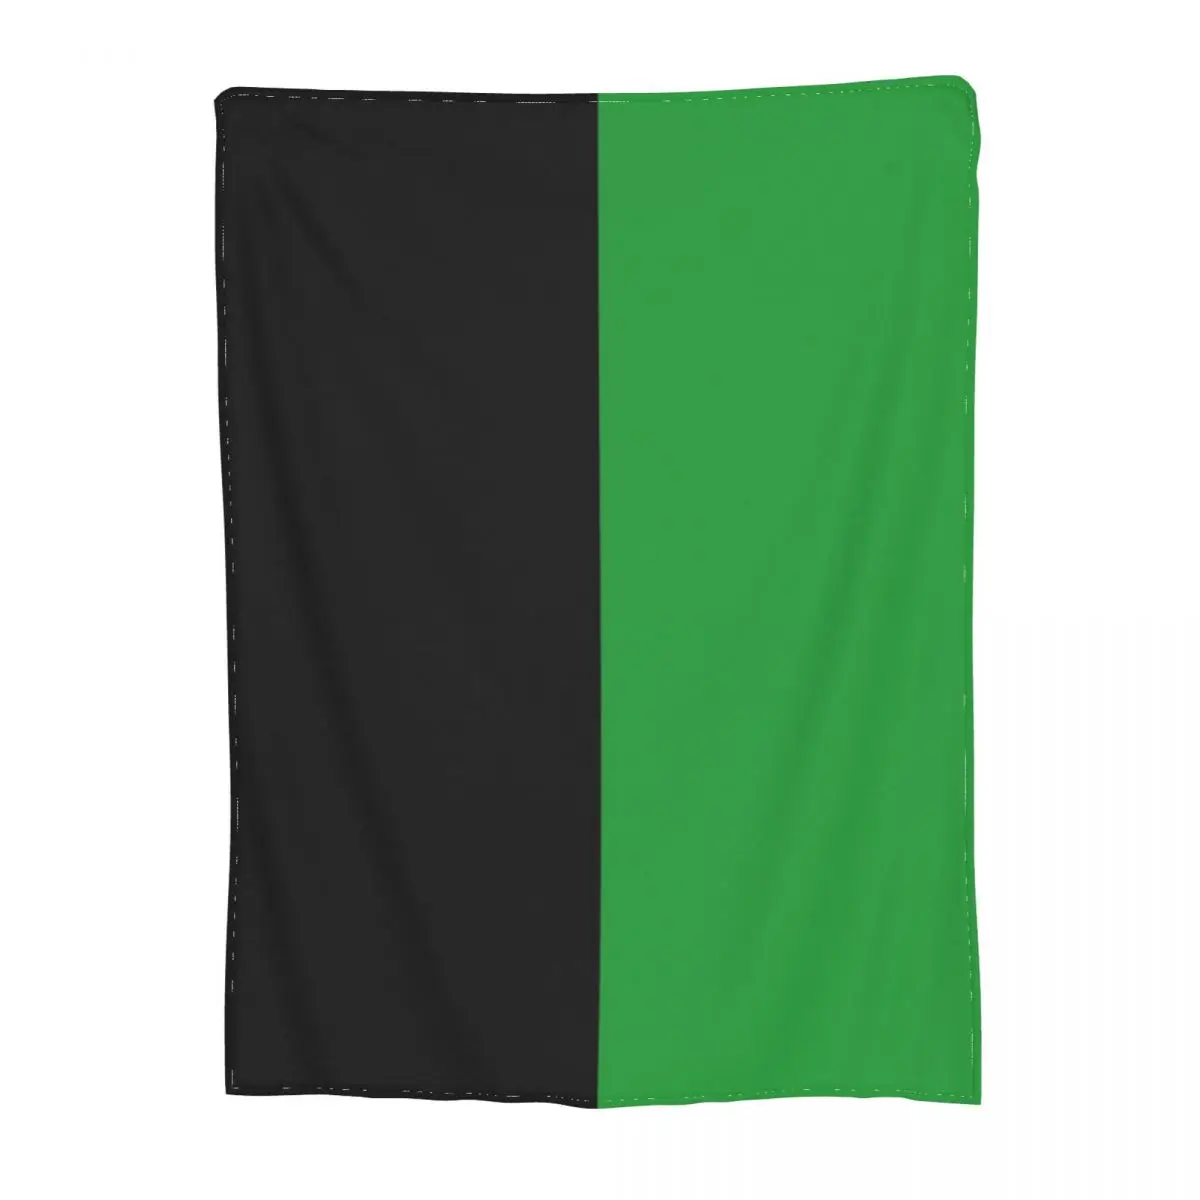 

Two Tone Design Blanket Black And Green Comfy Fleece Blanket Camping Super Soft Cheap Bedspread